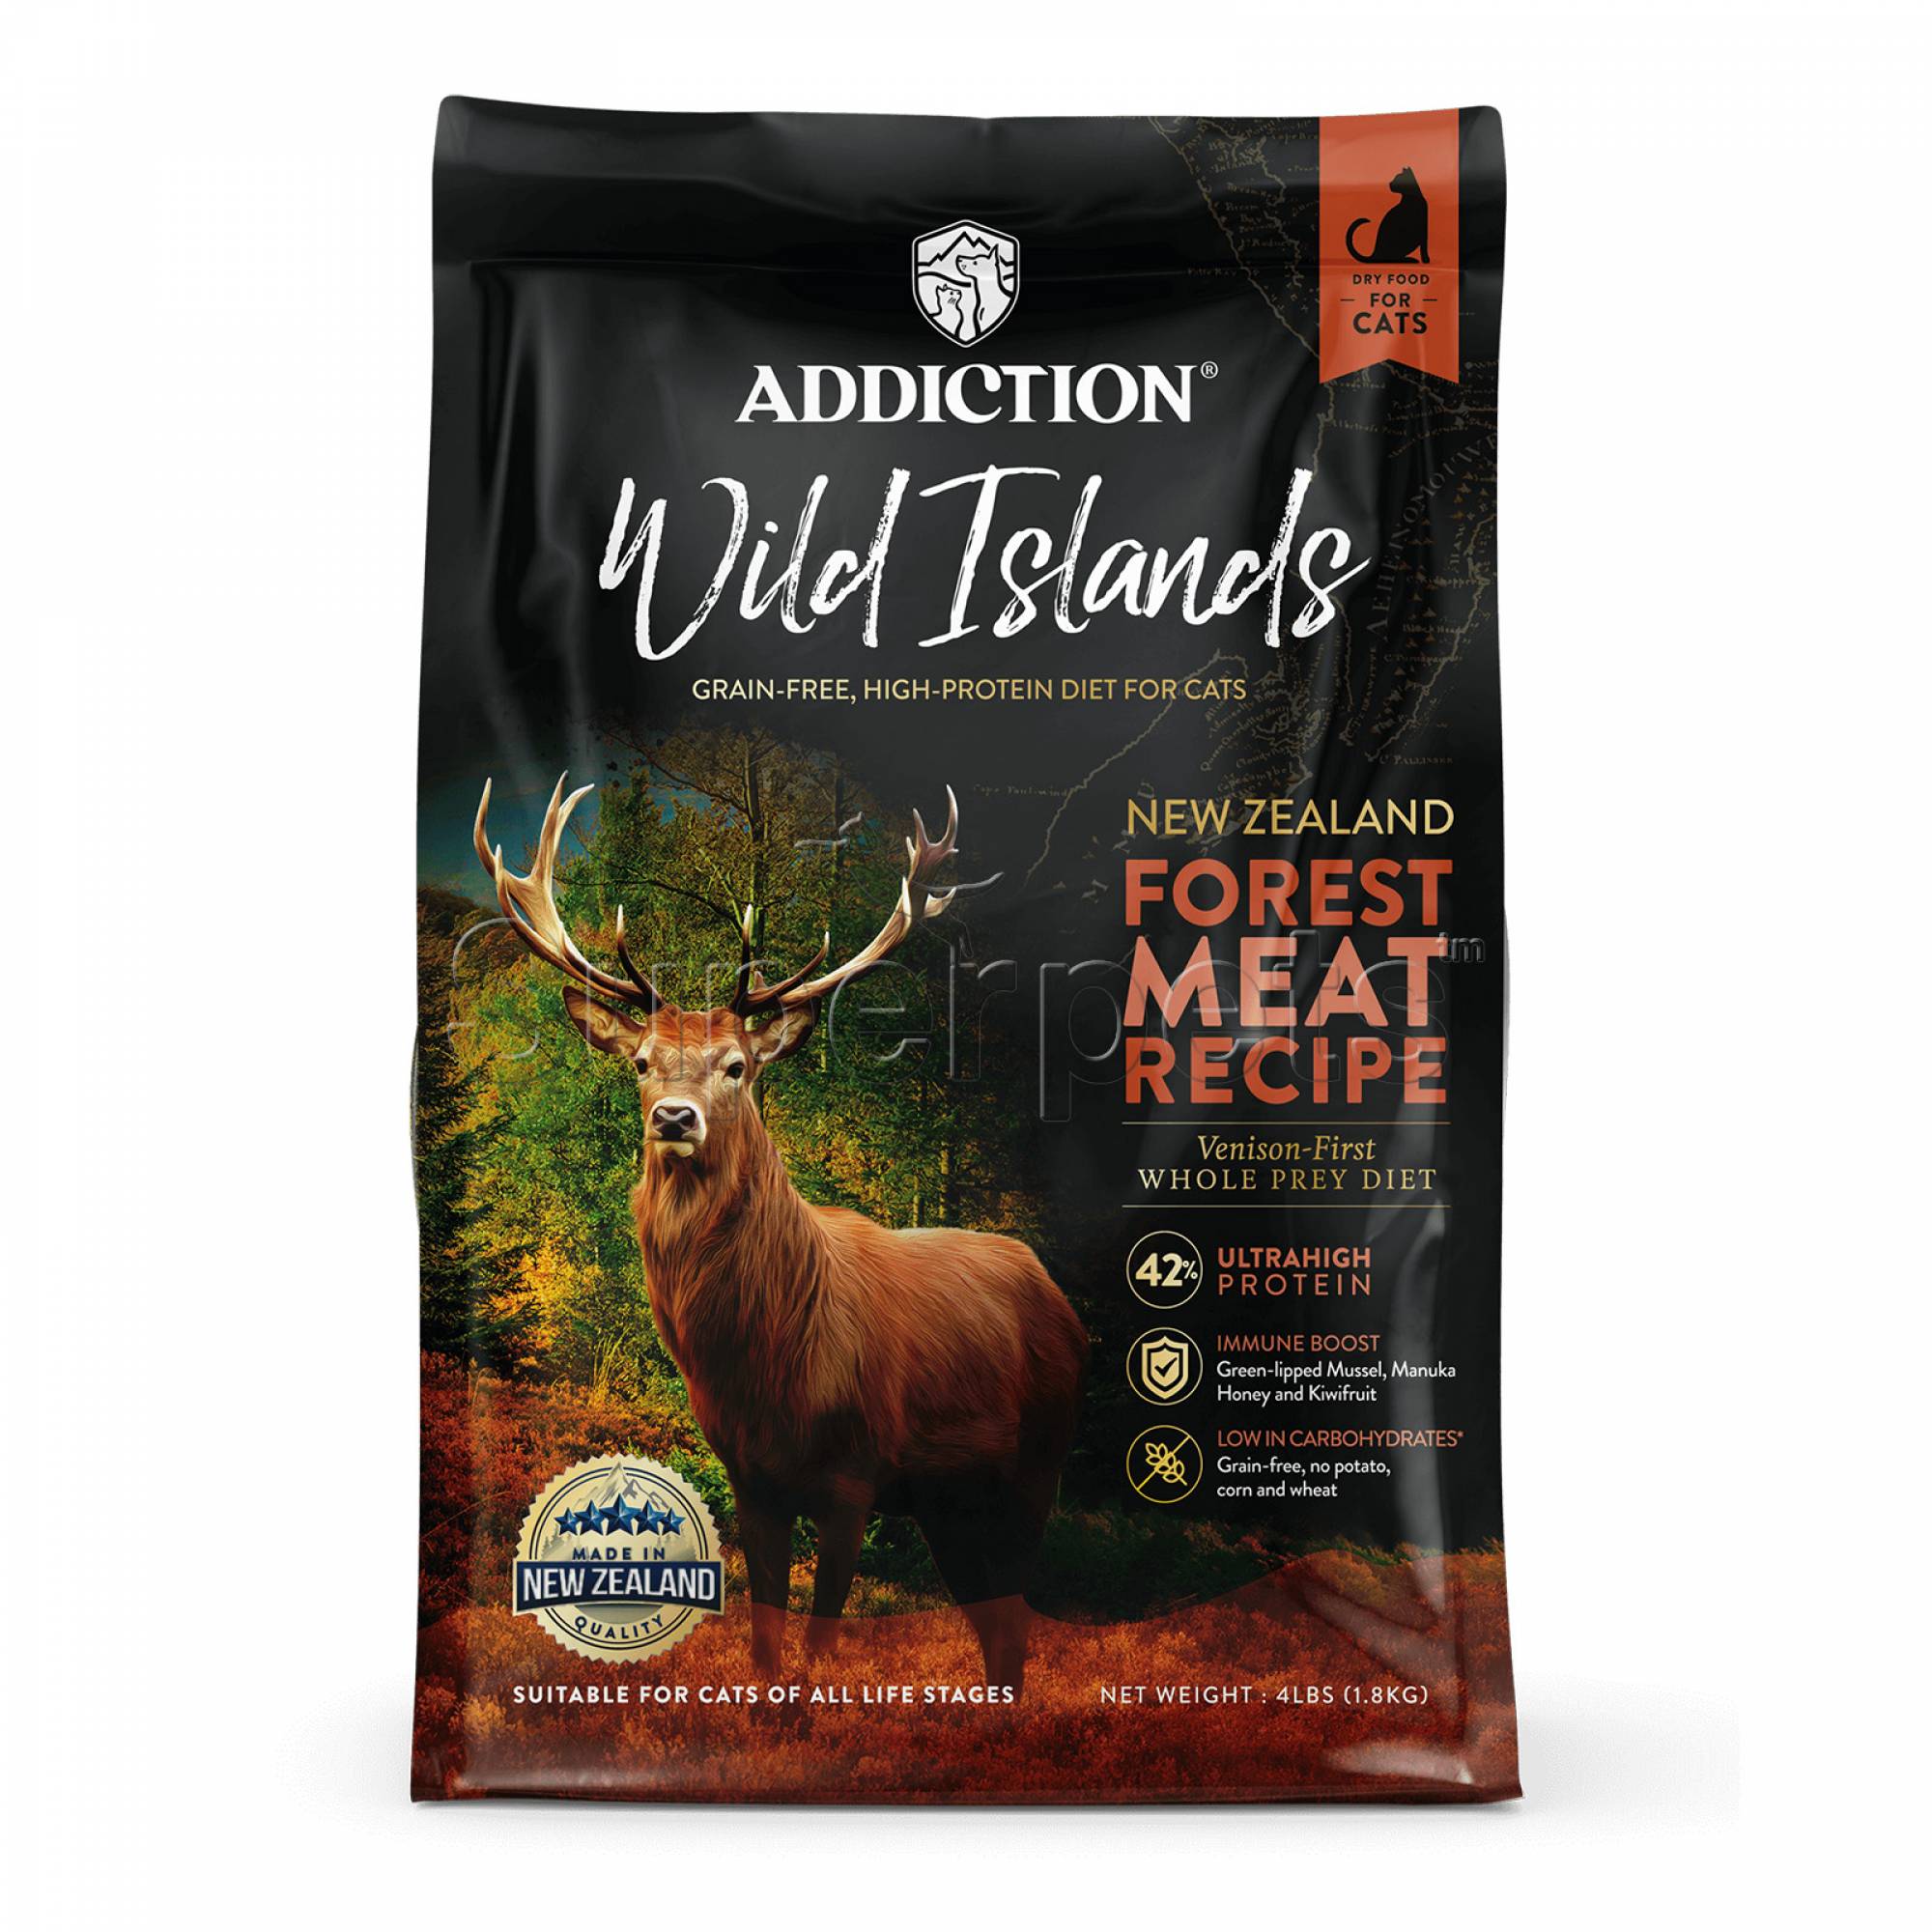 Addiction - Wild Islands Cat - Forest Meat 4lb (79298)